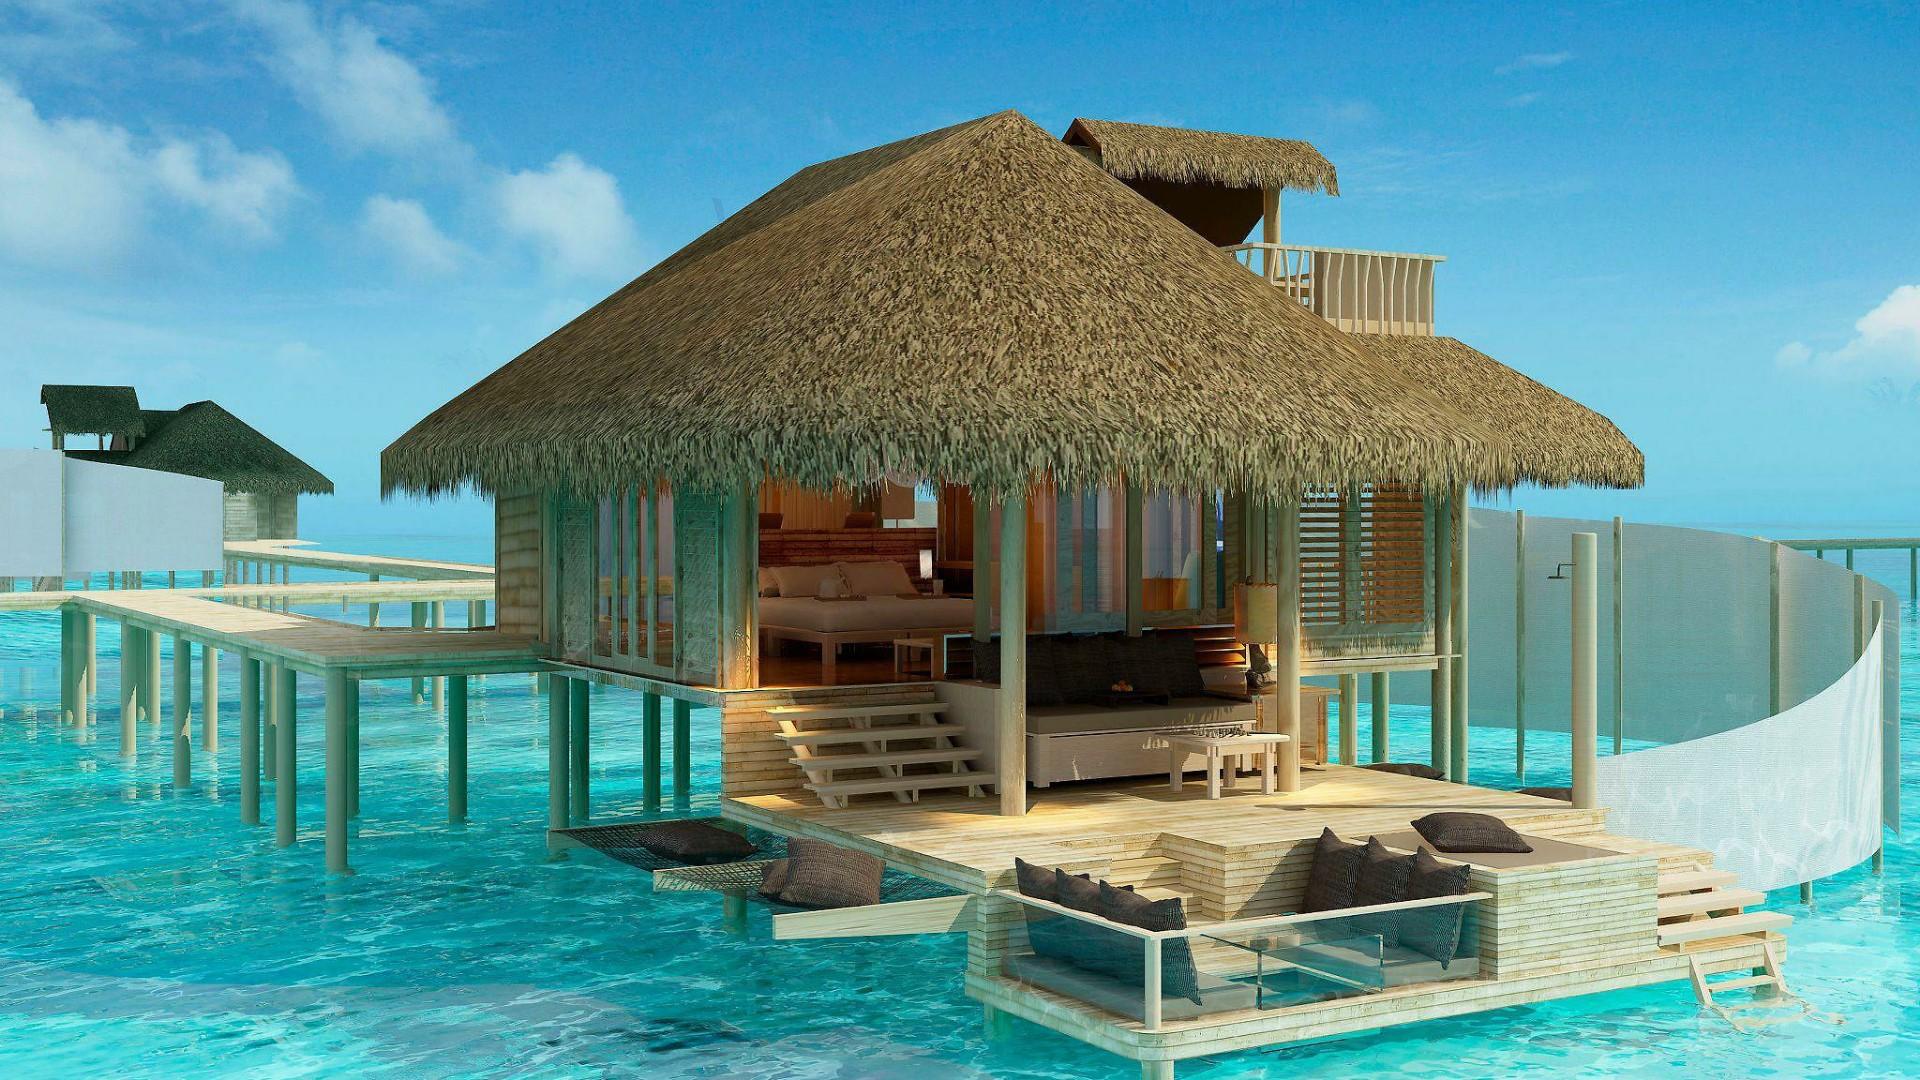 Overwater Bungalows In The Olhuveli Island, Maldives HD Wallpaper